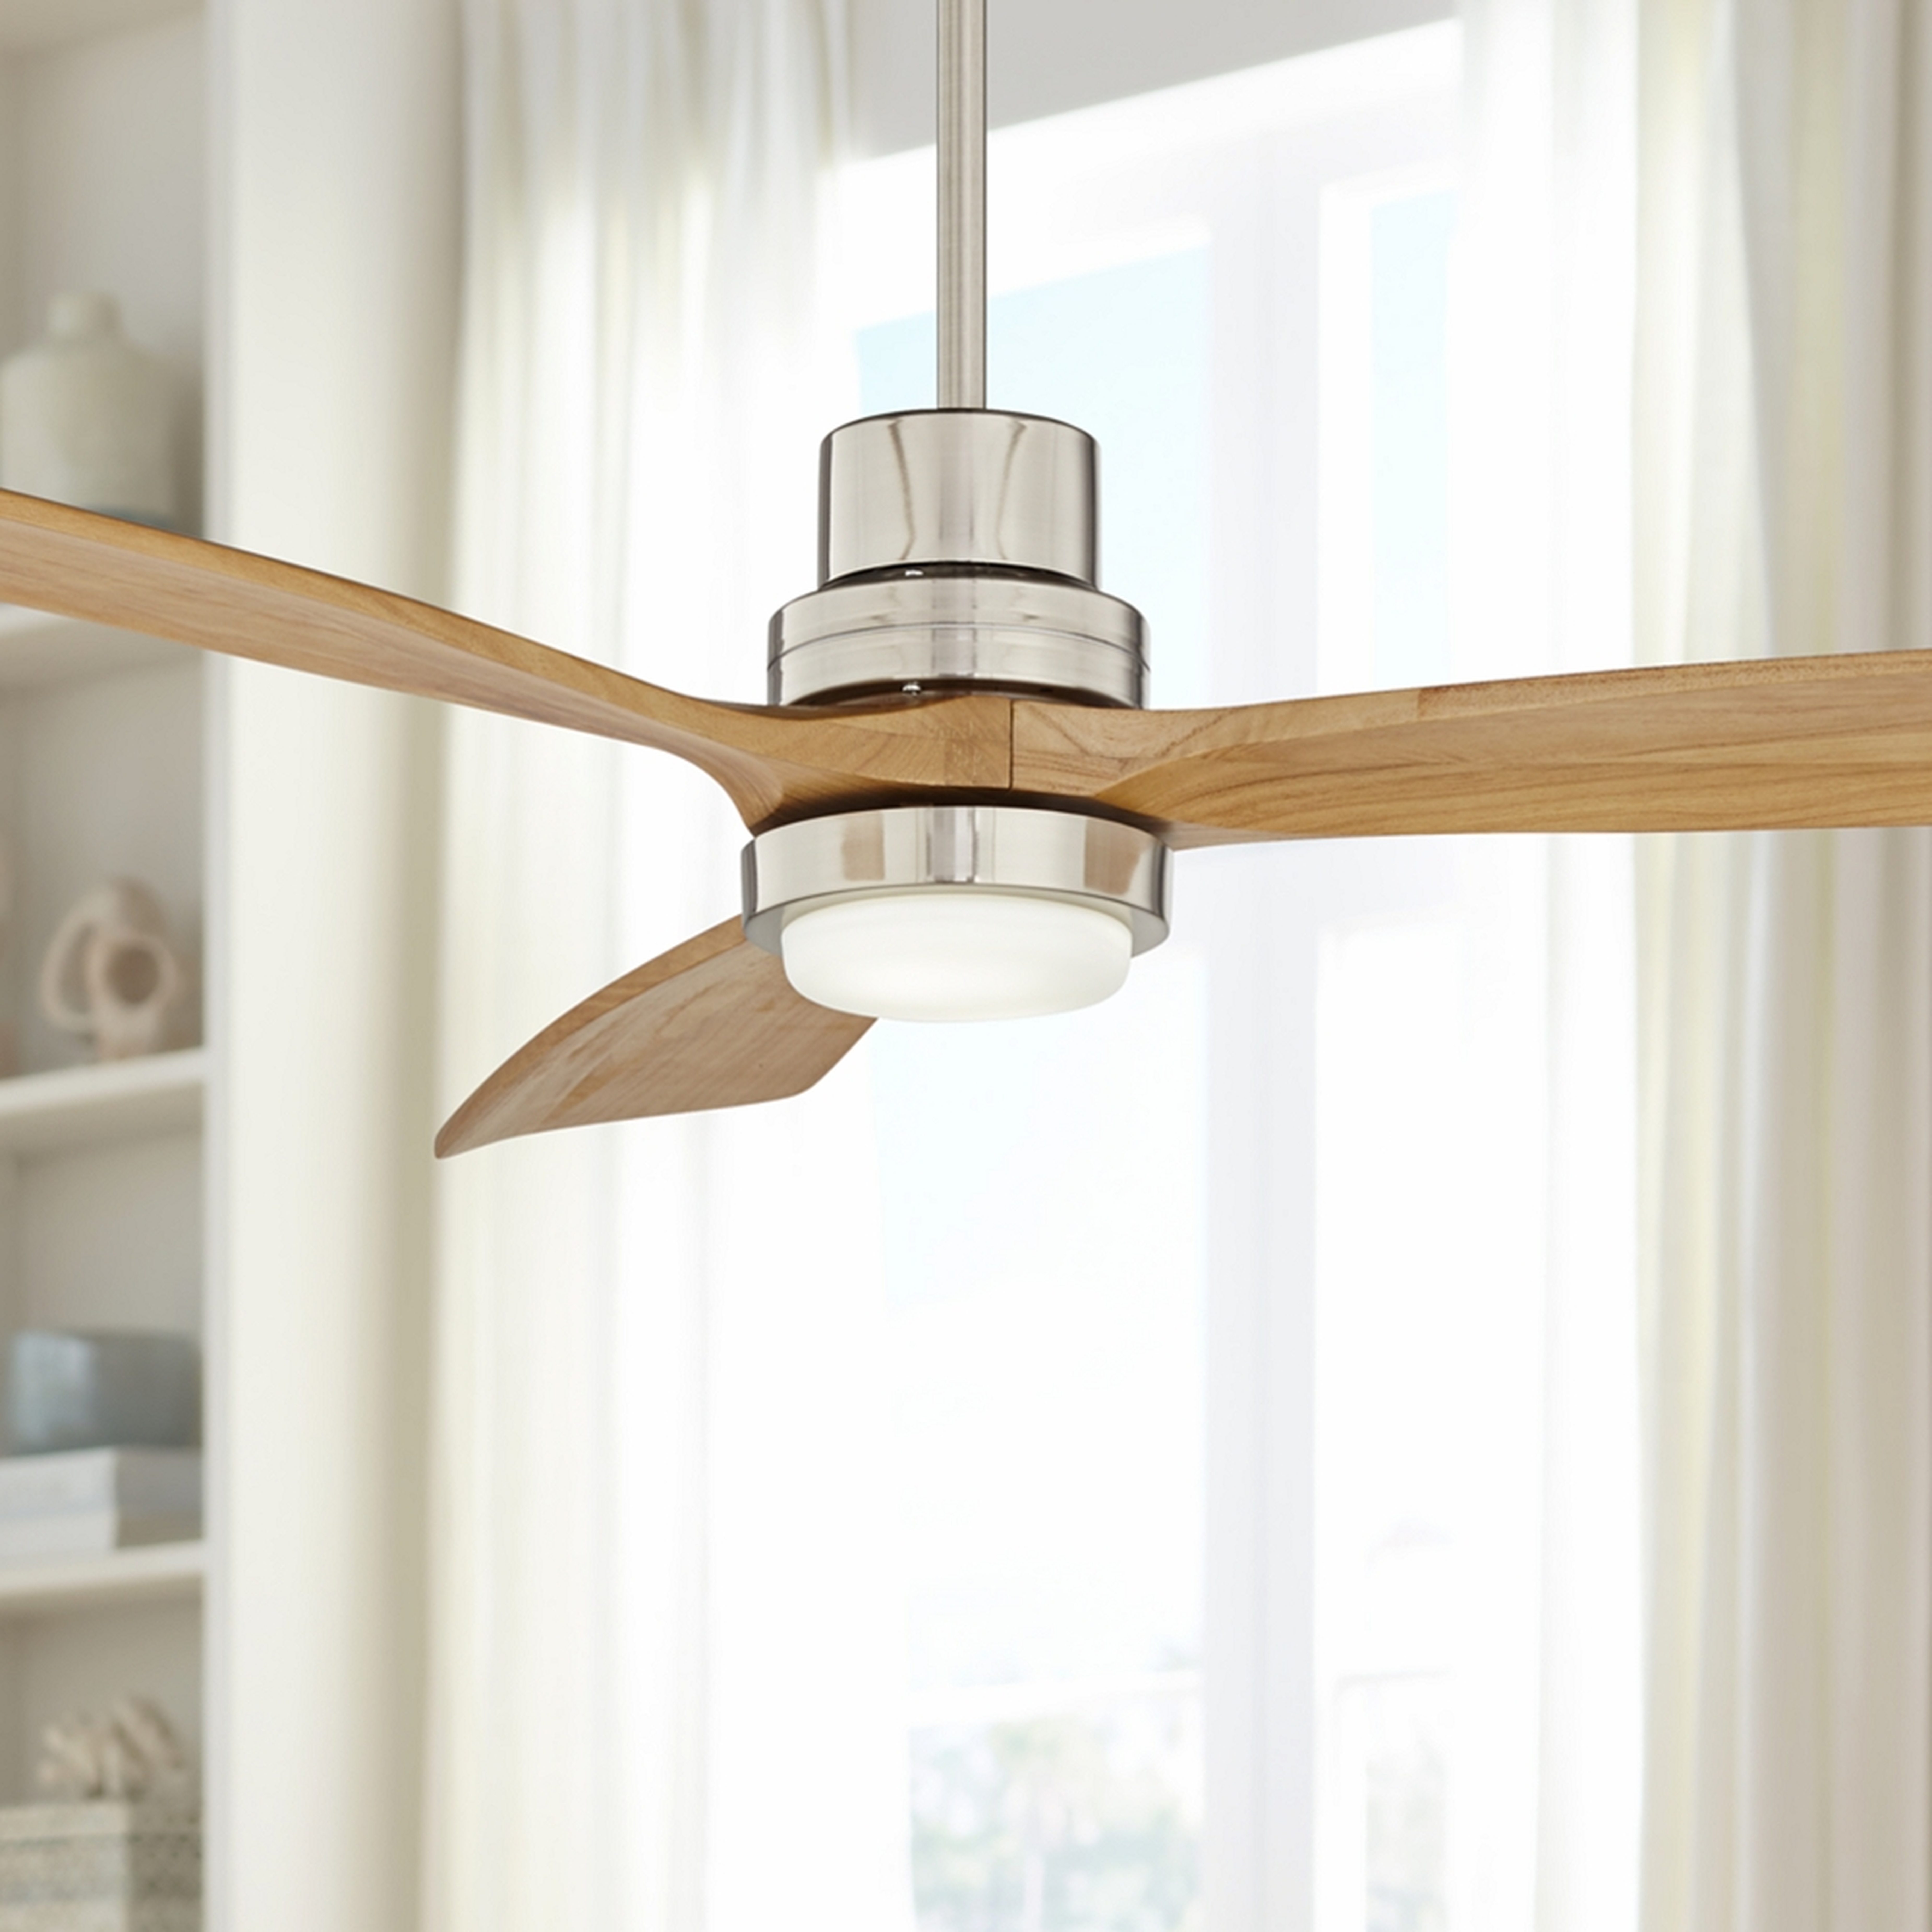 52" Casa Delta-Wing Brushed Nickel Natural LED Fan - Lamps Plus